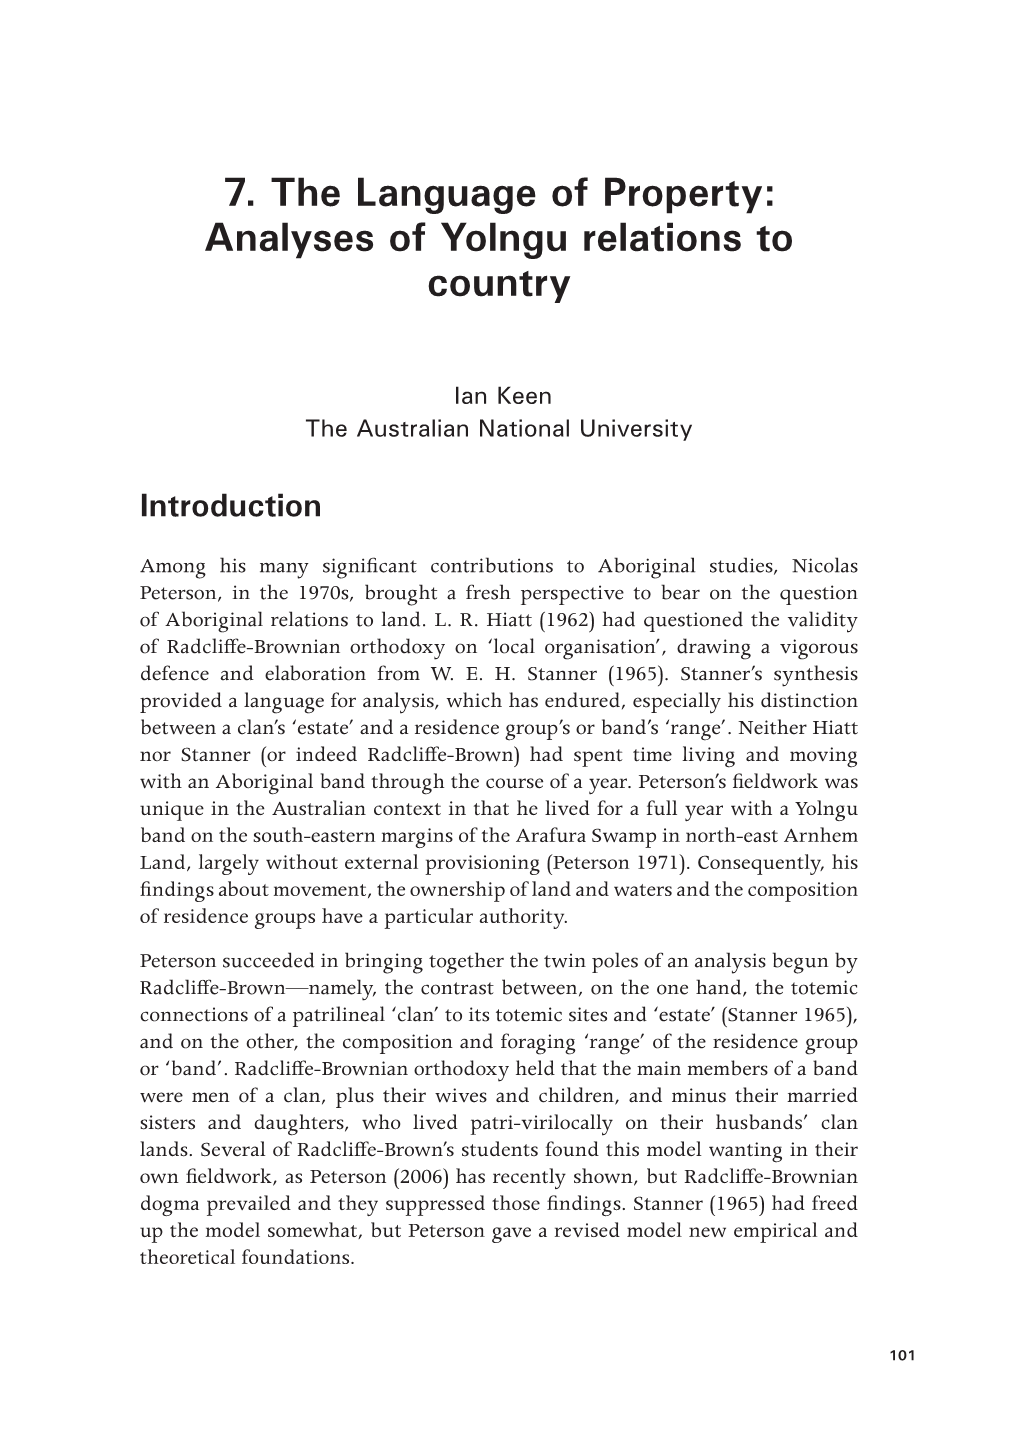 7. the Language of Property: Analyses of Yolngu Relations to Country